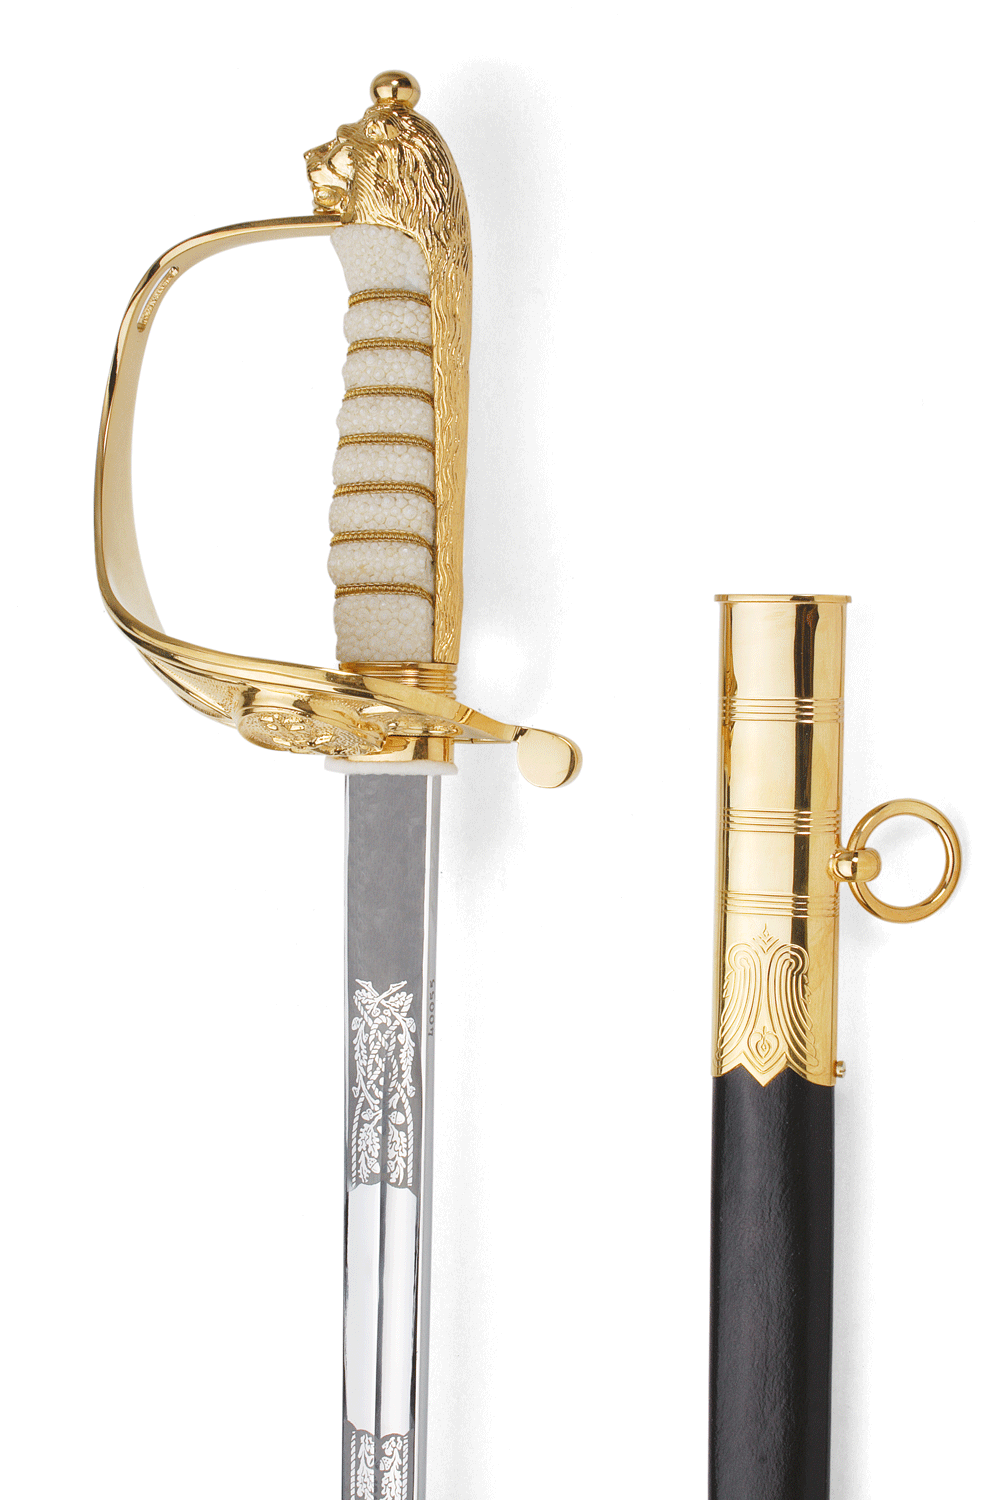 Royal Canadian Navy Officer Sword with scabbard